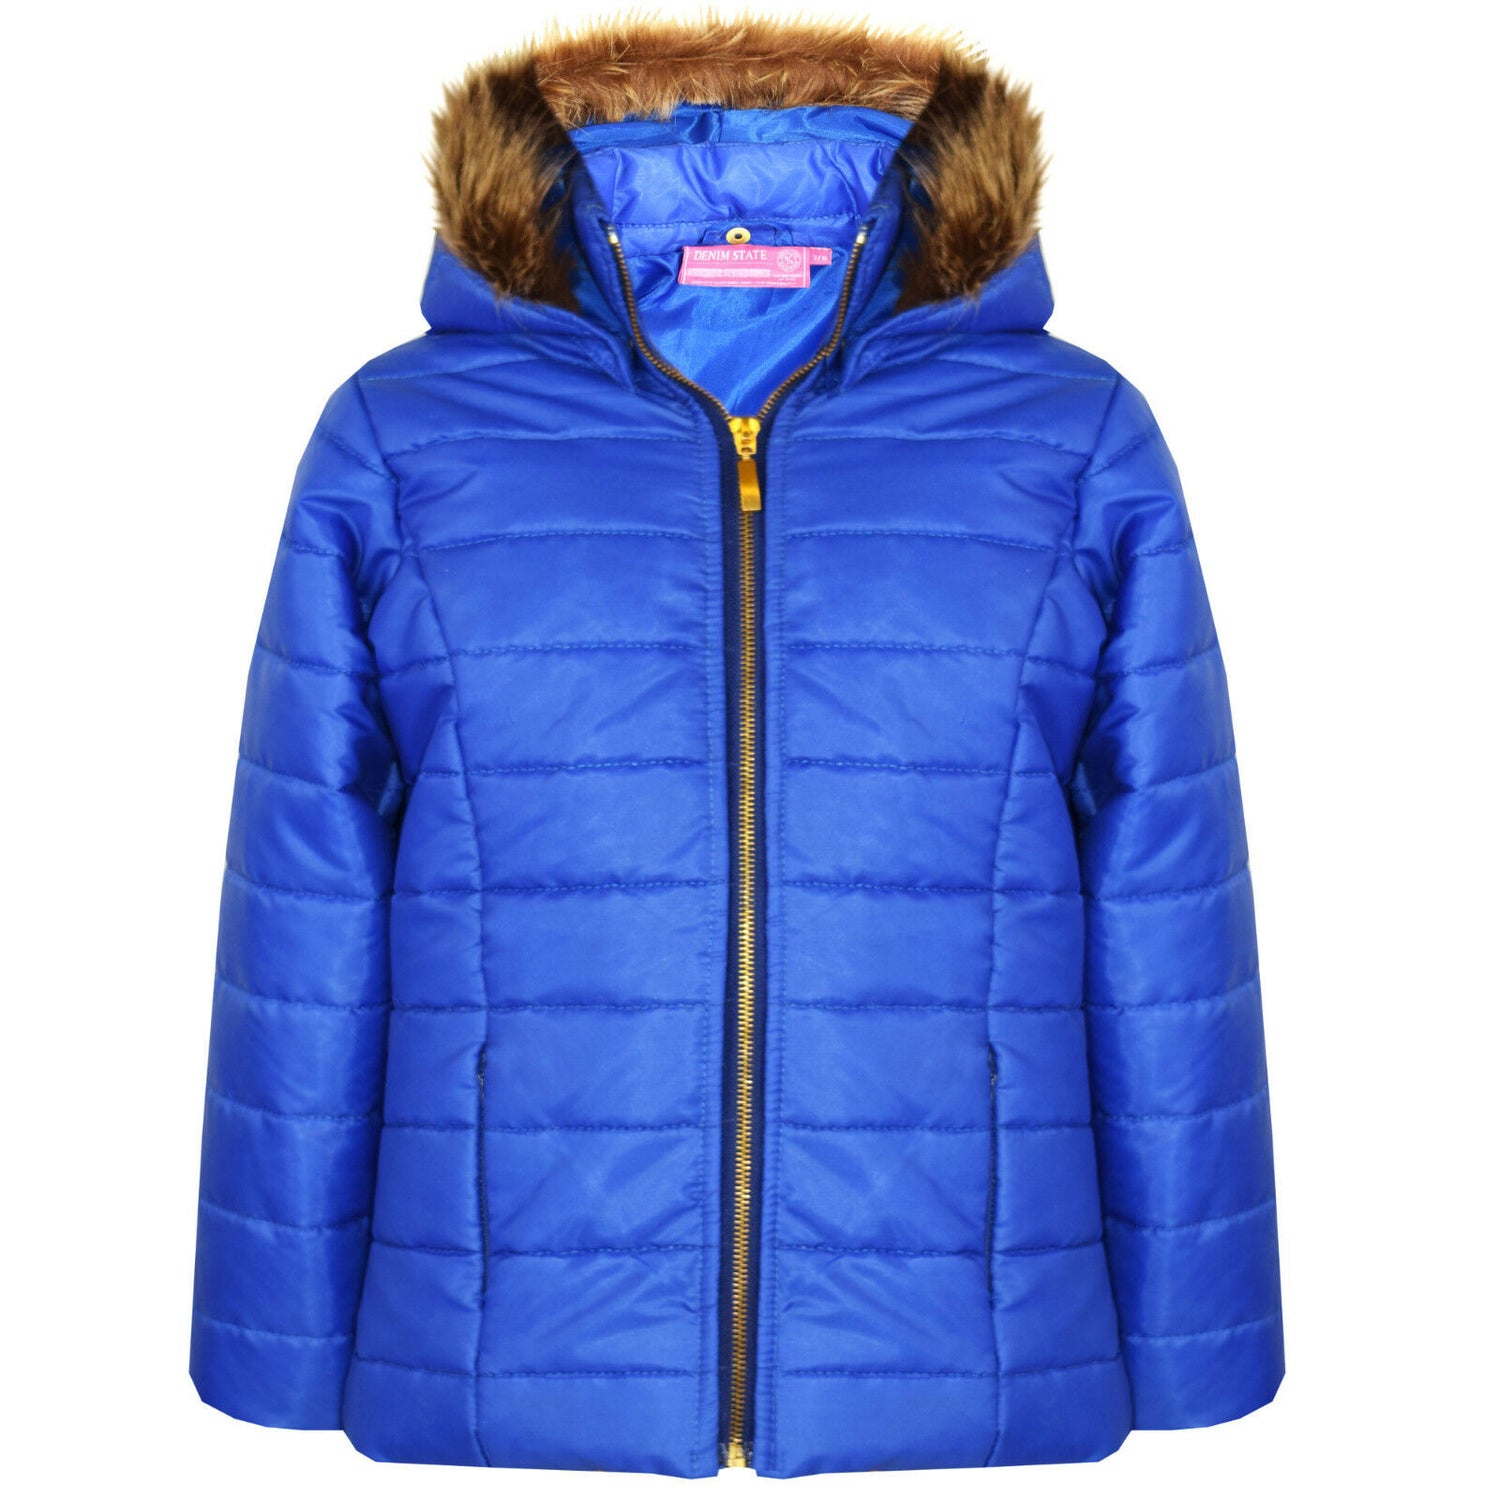 Royal Blue Wet Look Quilted Jacket With Fur Trim Hood.